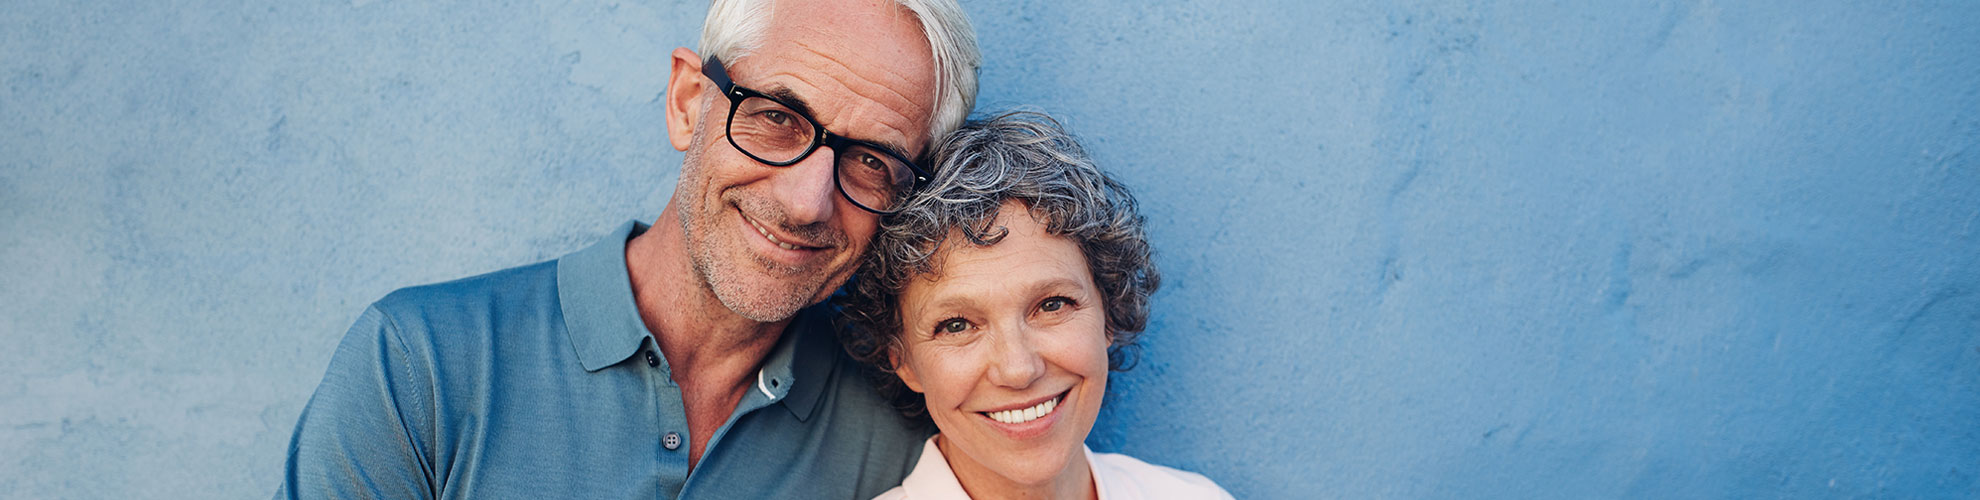 mature couple smiling against blue wall